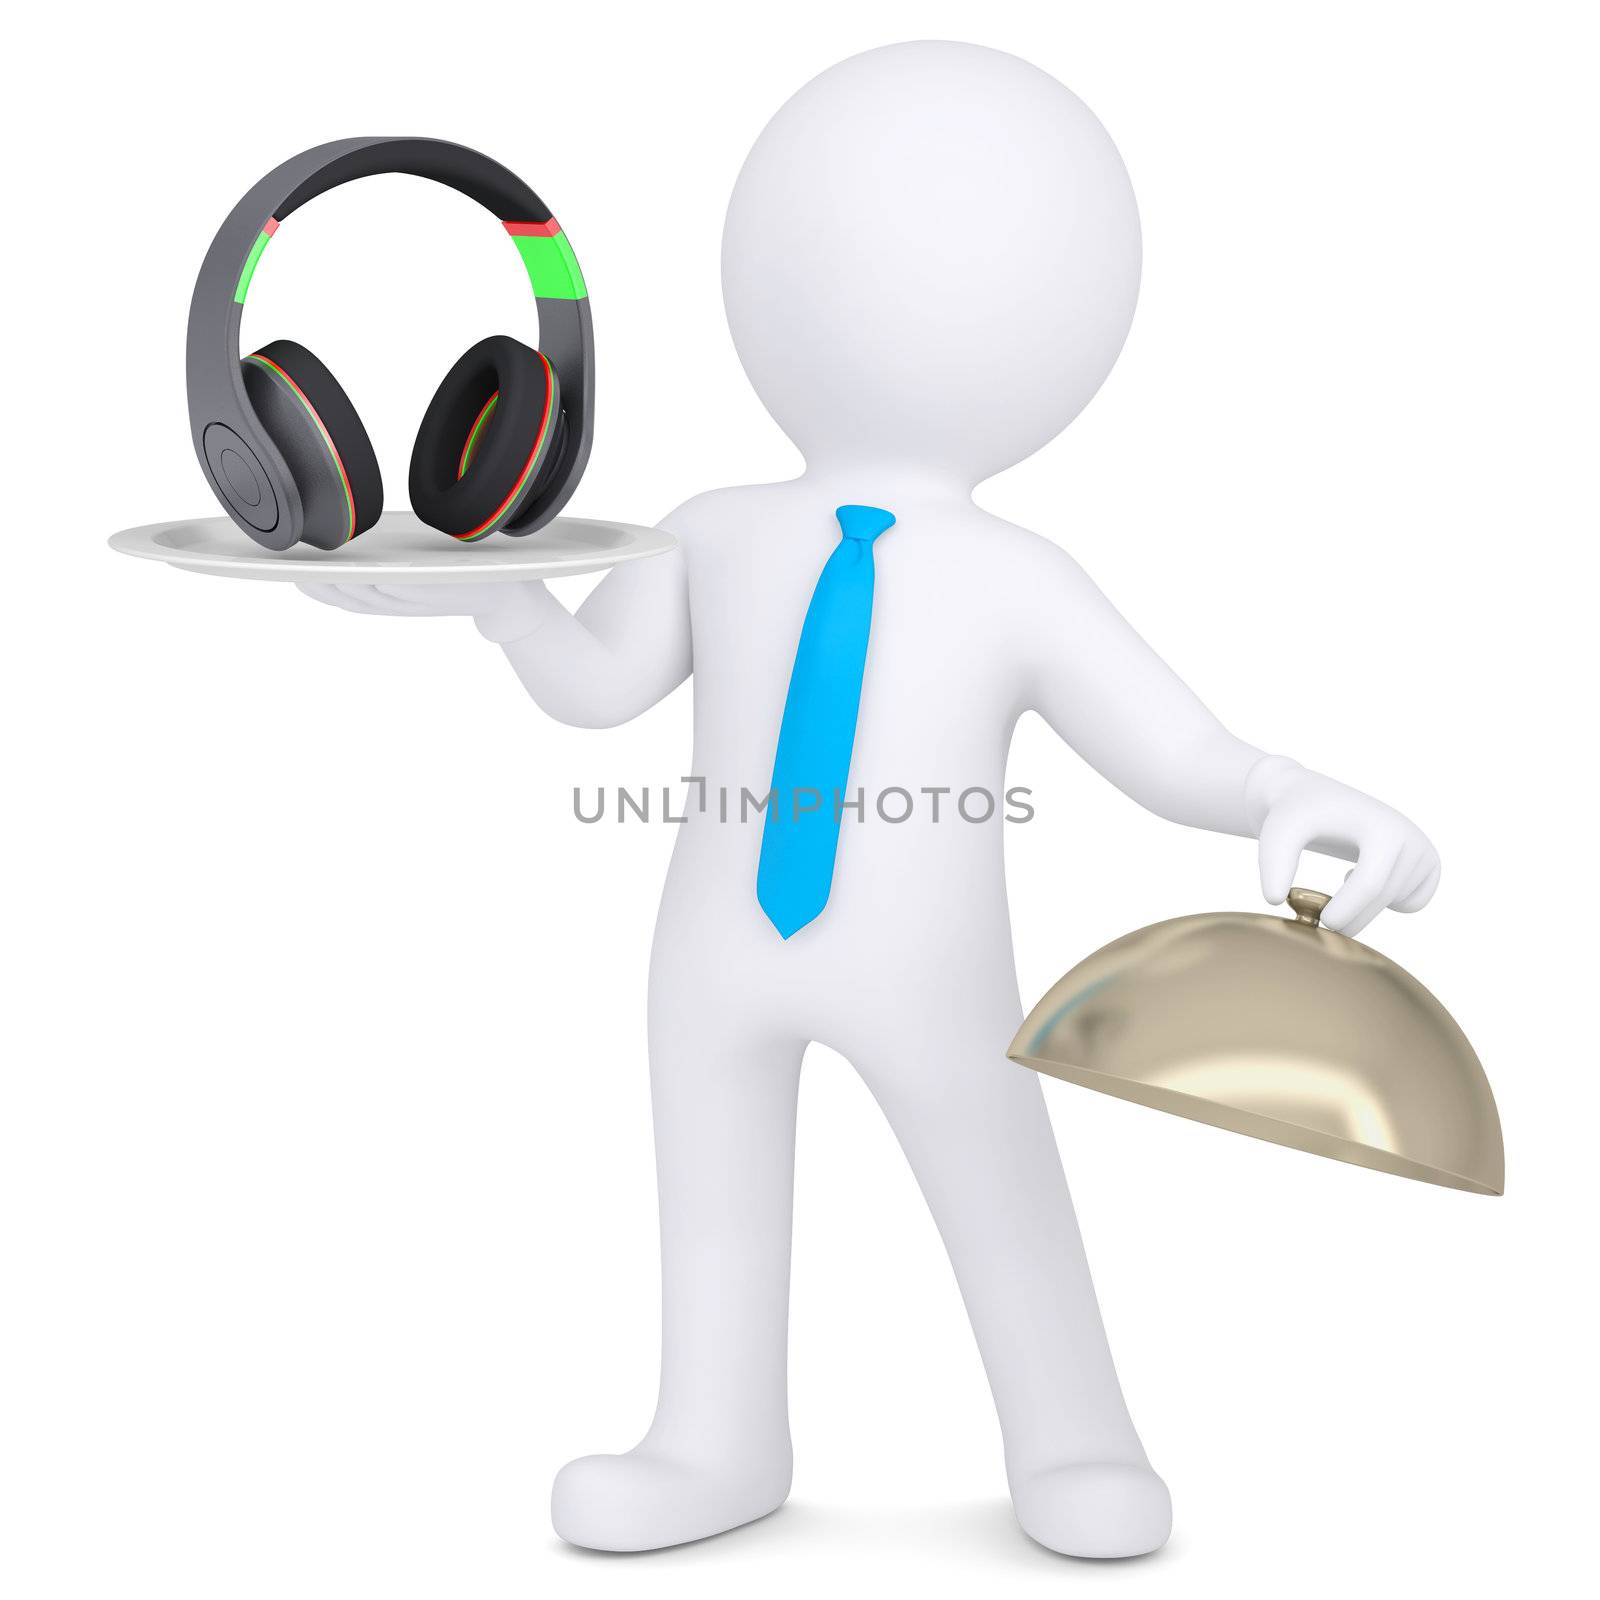 3d man holding headphones on a platter. Isolated render on a white background